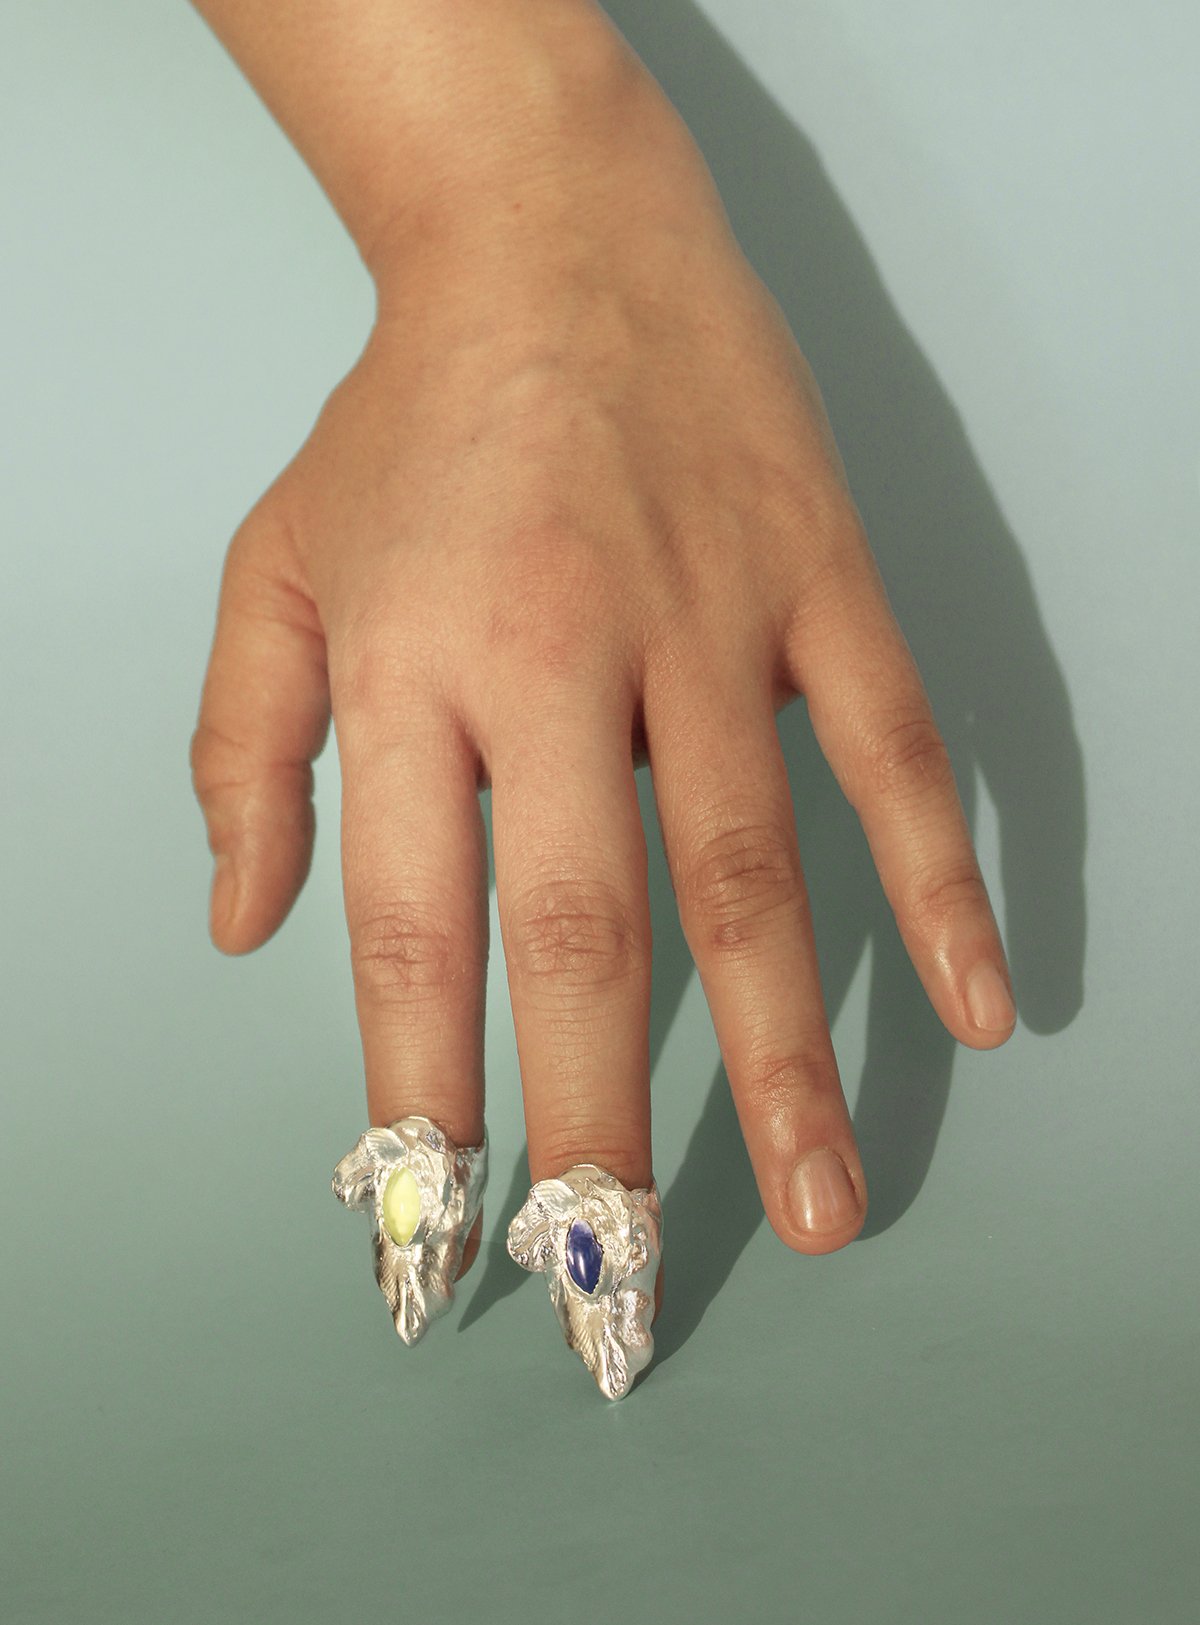 ORCHIS CLAW // silver nail ring - ORA-C jewelry - handmade jewelry by Montreal based independent designer Caroline Pham